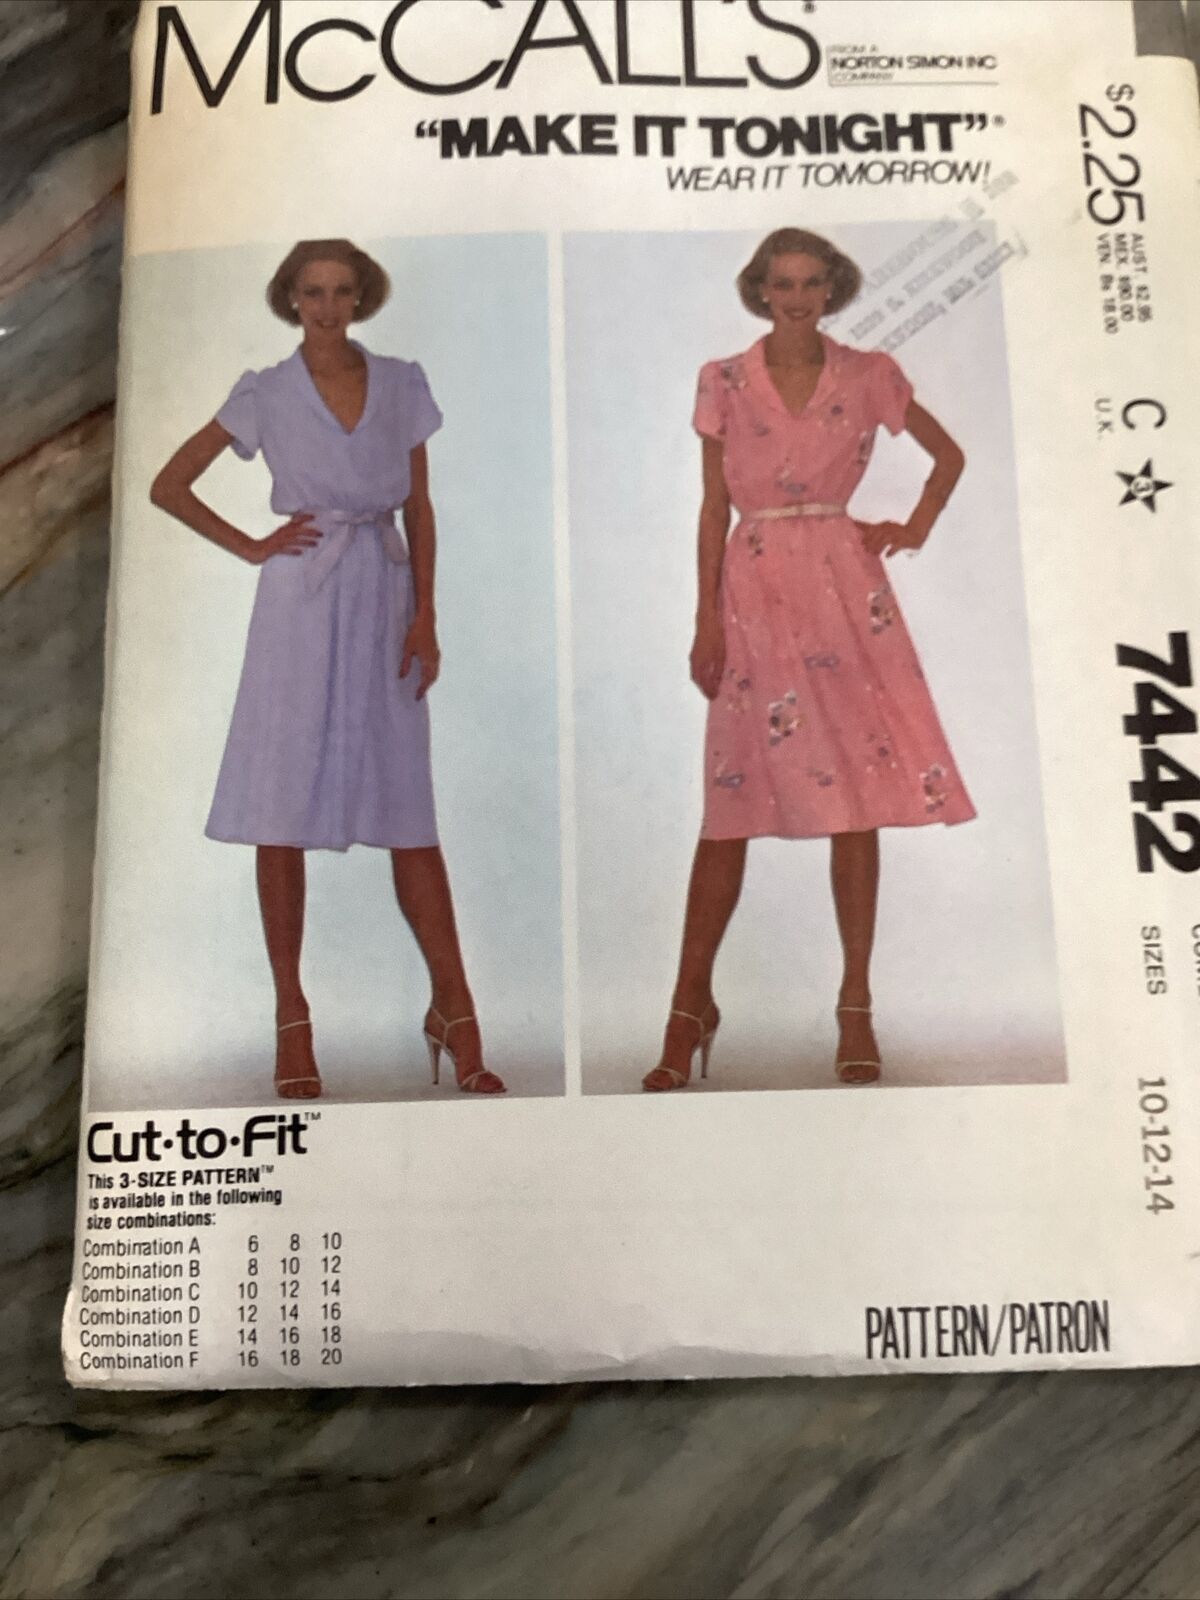 McCall\'s 7442 Vintage Sewing Pattern Misses Dress 3 Size Pattern 10-12-14